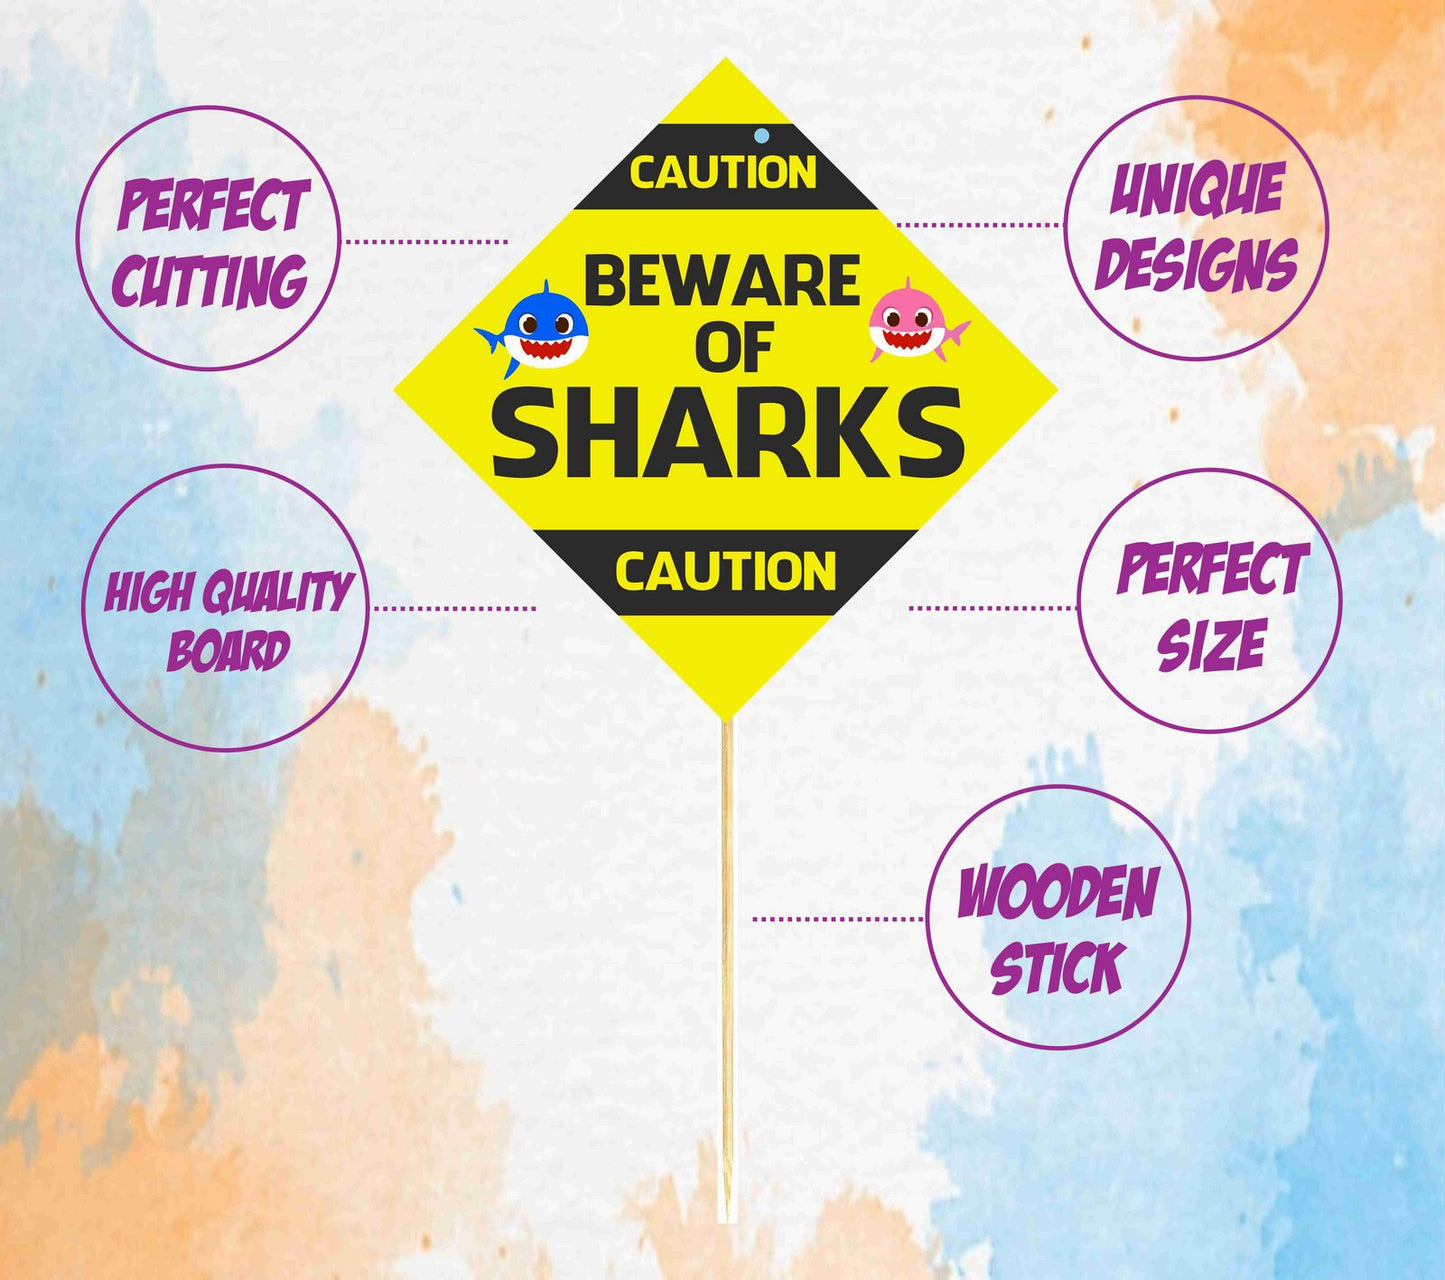 Baby Shark Birthday Photo Booth Party Props Theme Birthday Party Decoration, Birthday Photo Booth Party Item for Adults and Kids